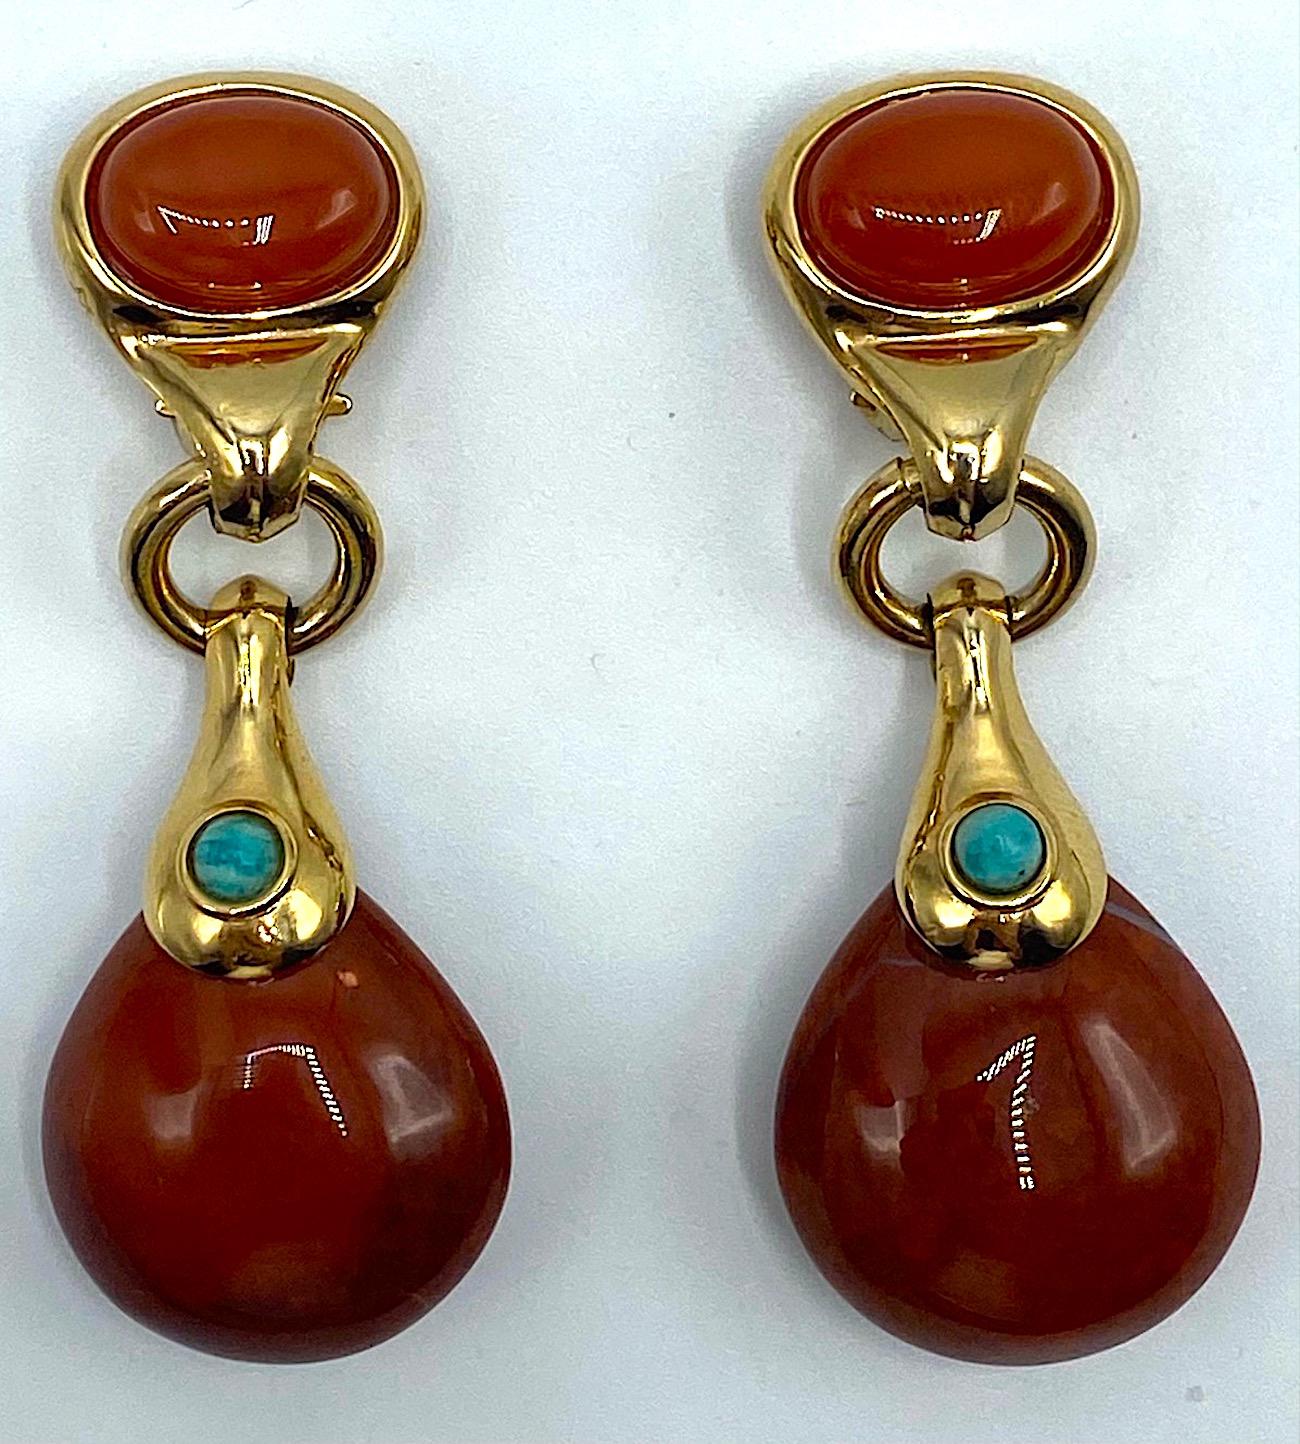 A pair of 1980s pendant earrings from Italian fashion jewelry designer Francesca Romana. They are gold plated with the tops set with an oval carnelian color glass cabochon. Suspended from a half inch diameter ring is a polished natural pear shape